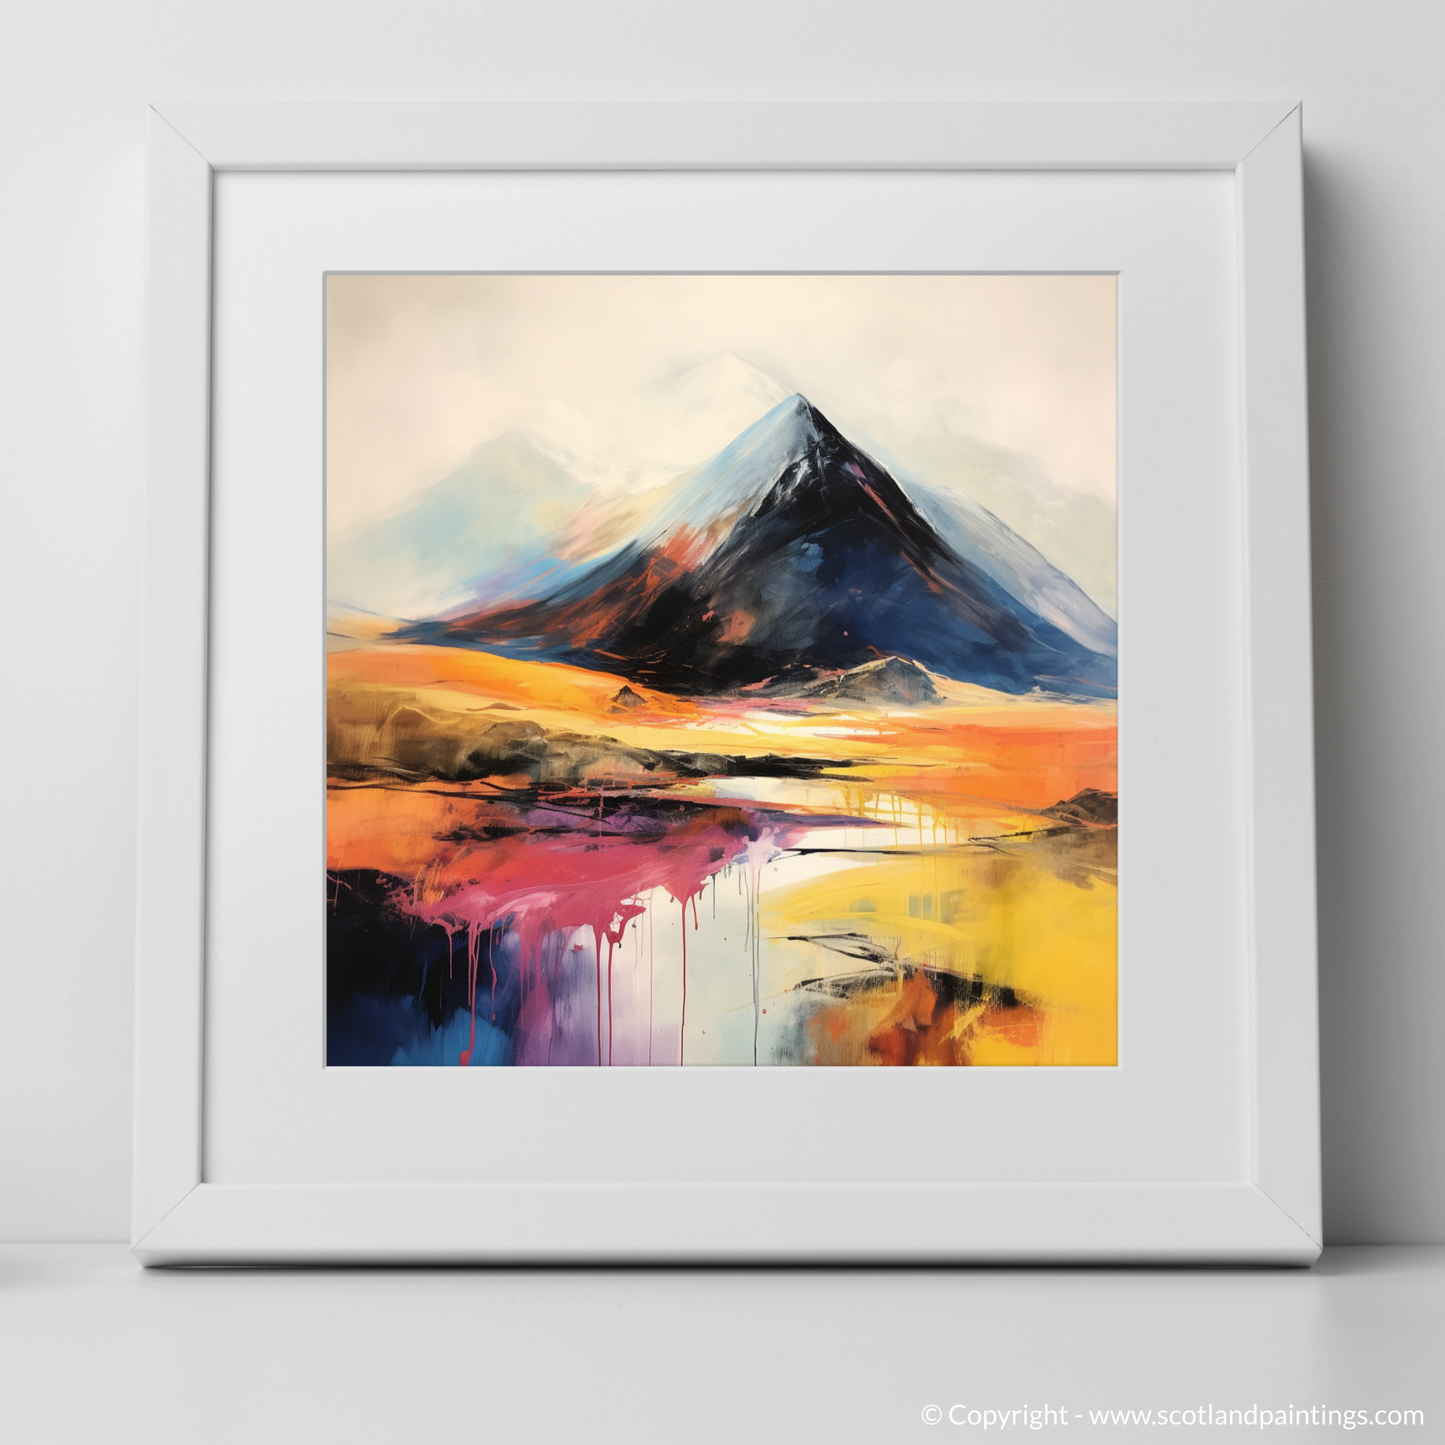 Scottish Highlands Abstract: The Enigma of Stob Dearg